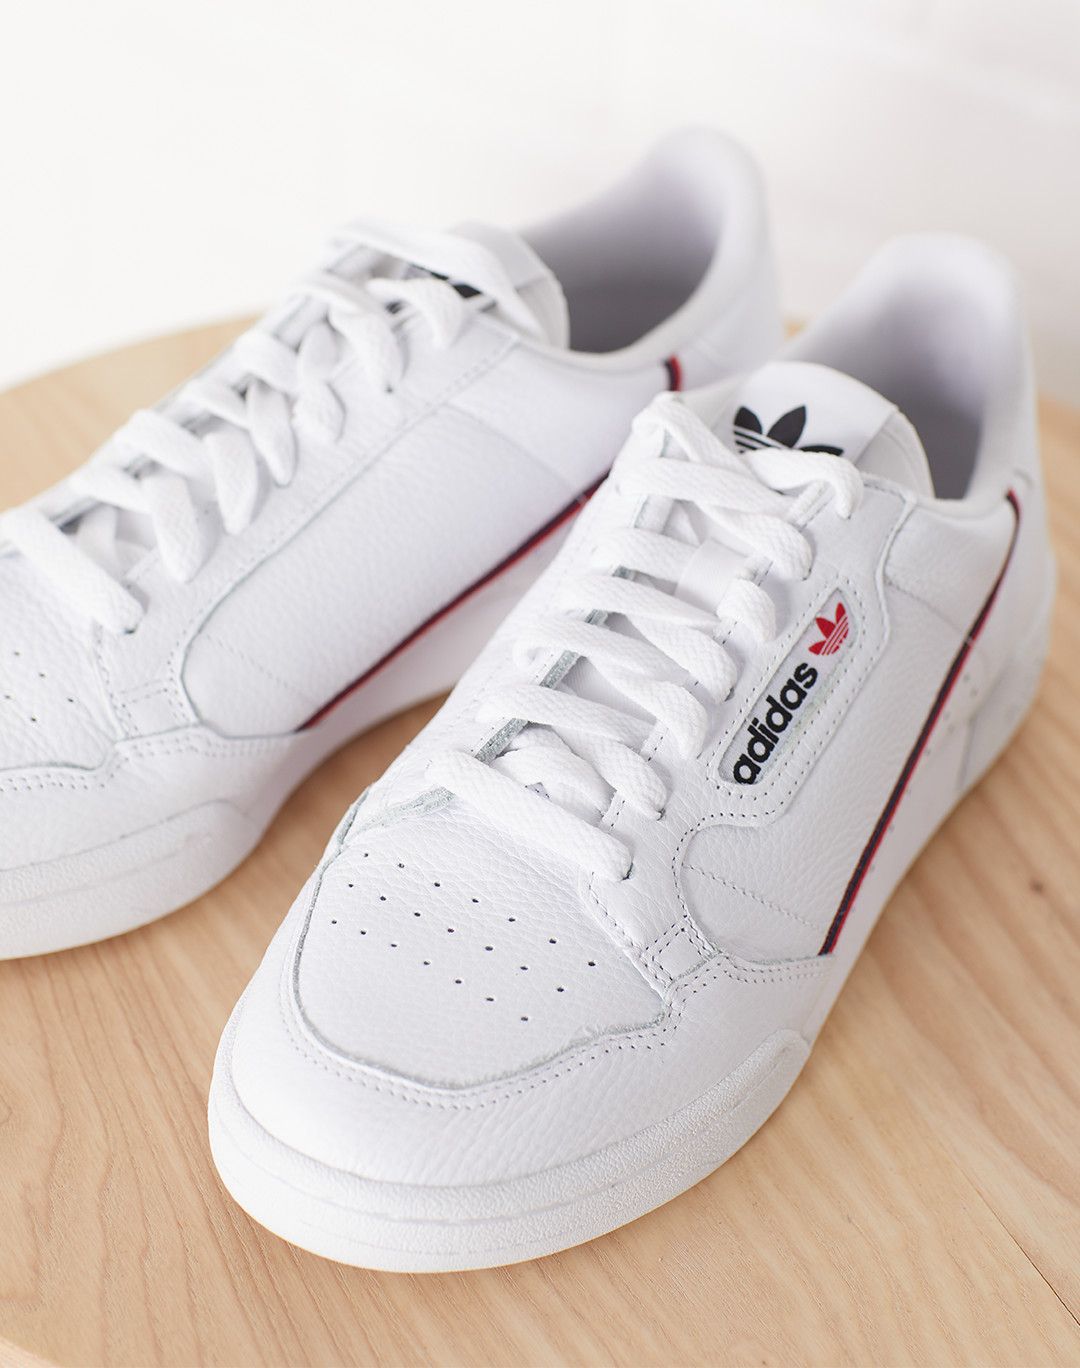 Adidas Continental 80 Stripes Trainers White/Black - 80s Casual Classics